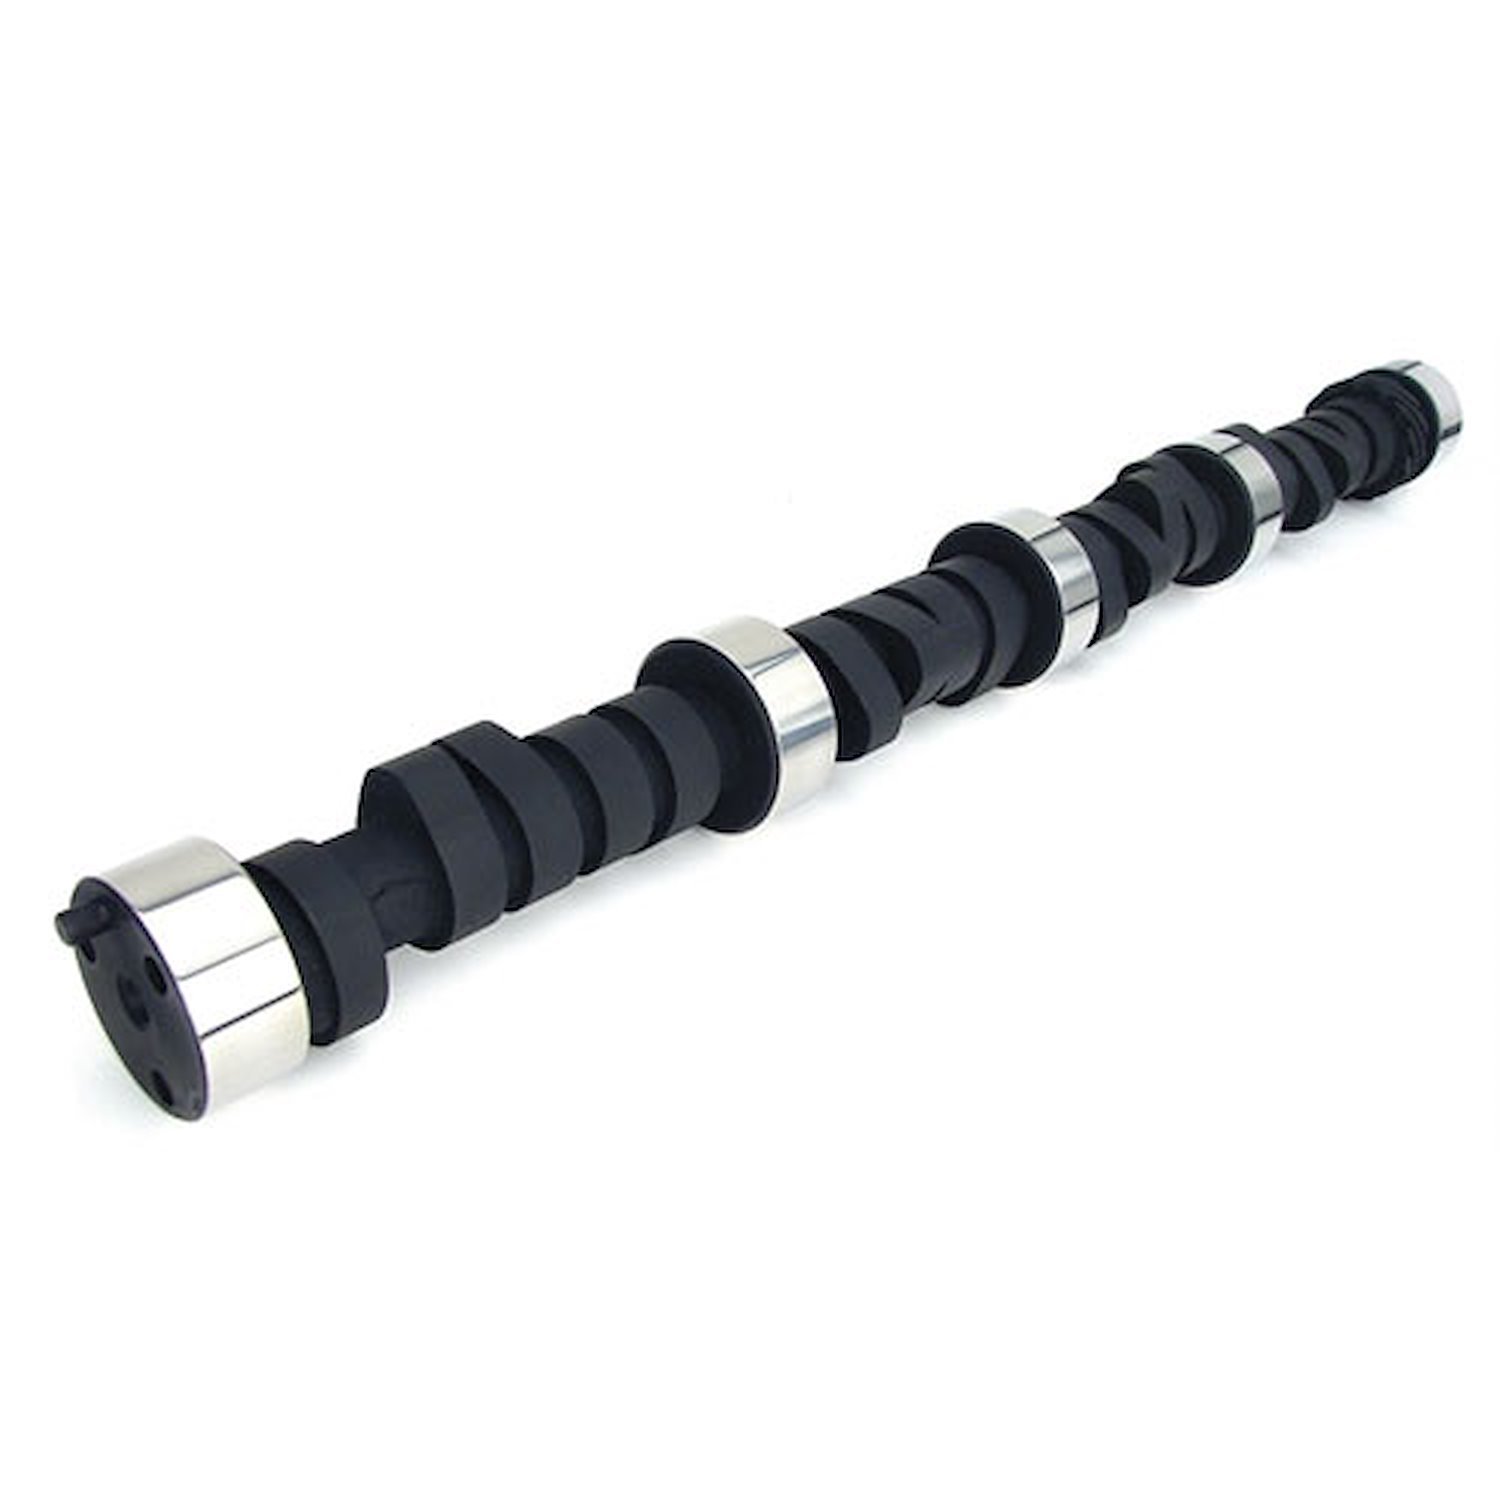 High Energy 260H Hydraulic Flat Tappet Camshaft Lift: .440" /.440" Duration: 260°/260° RPM Range: 1200-5200 C.A.R.B. Approved*